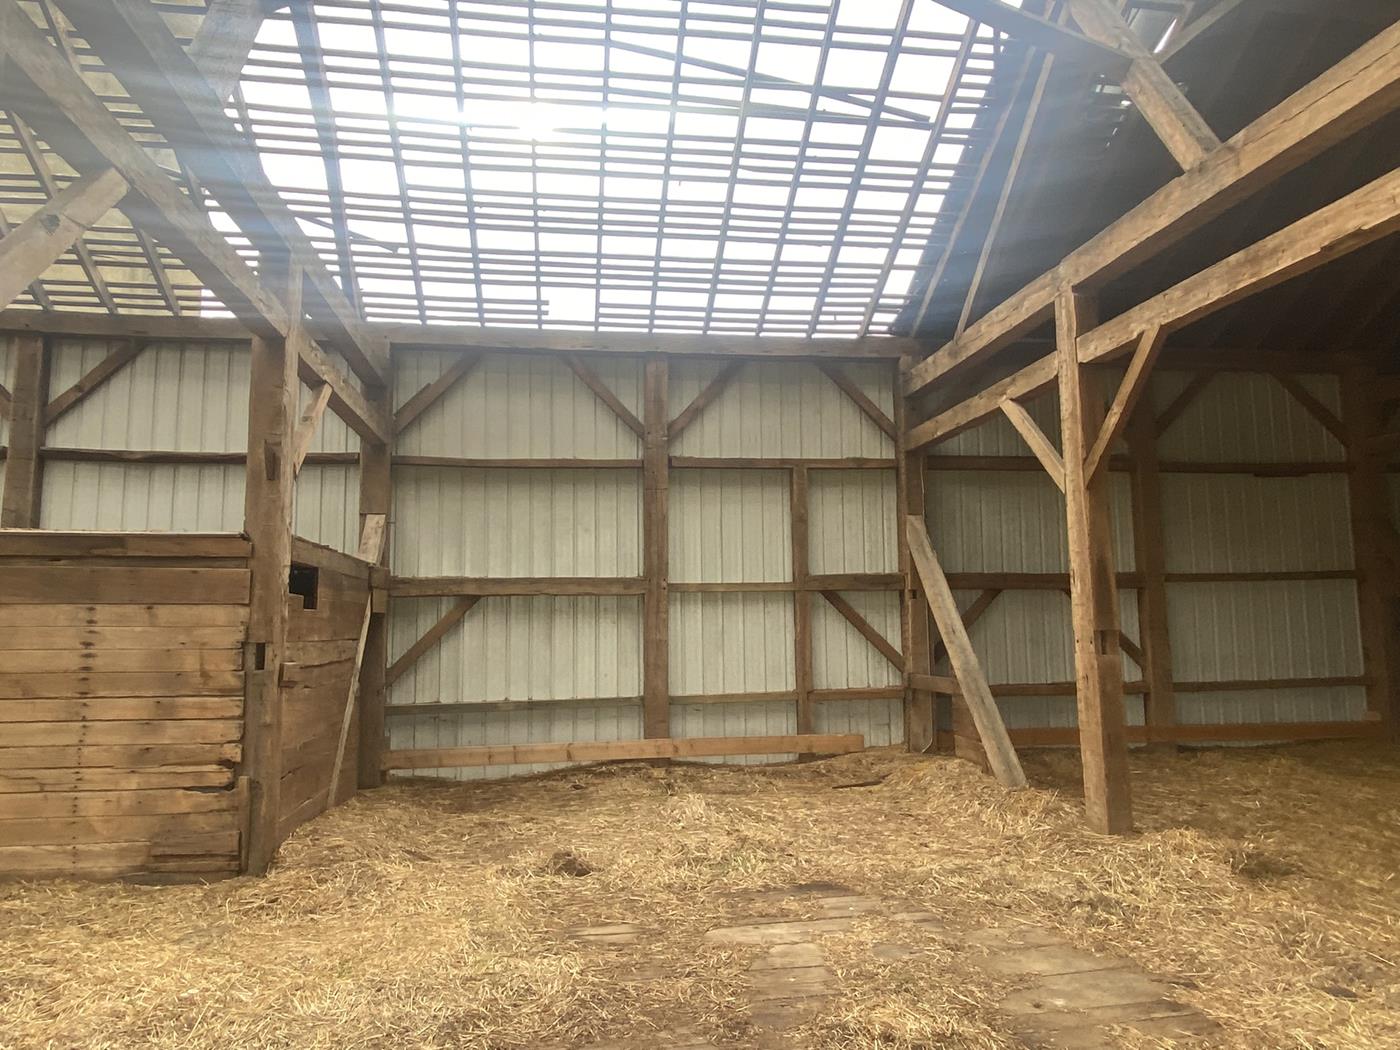 https://www.ohiovalleybarnsalvage.com/images/Mast Barn Frame Ohio Valley Salvage - Your Source For Repurposed Wall Cladding